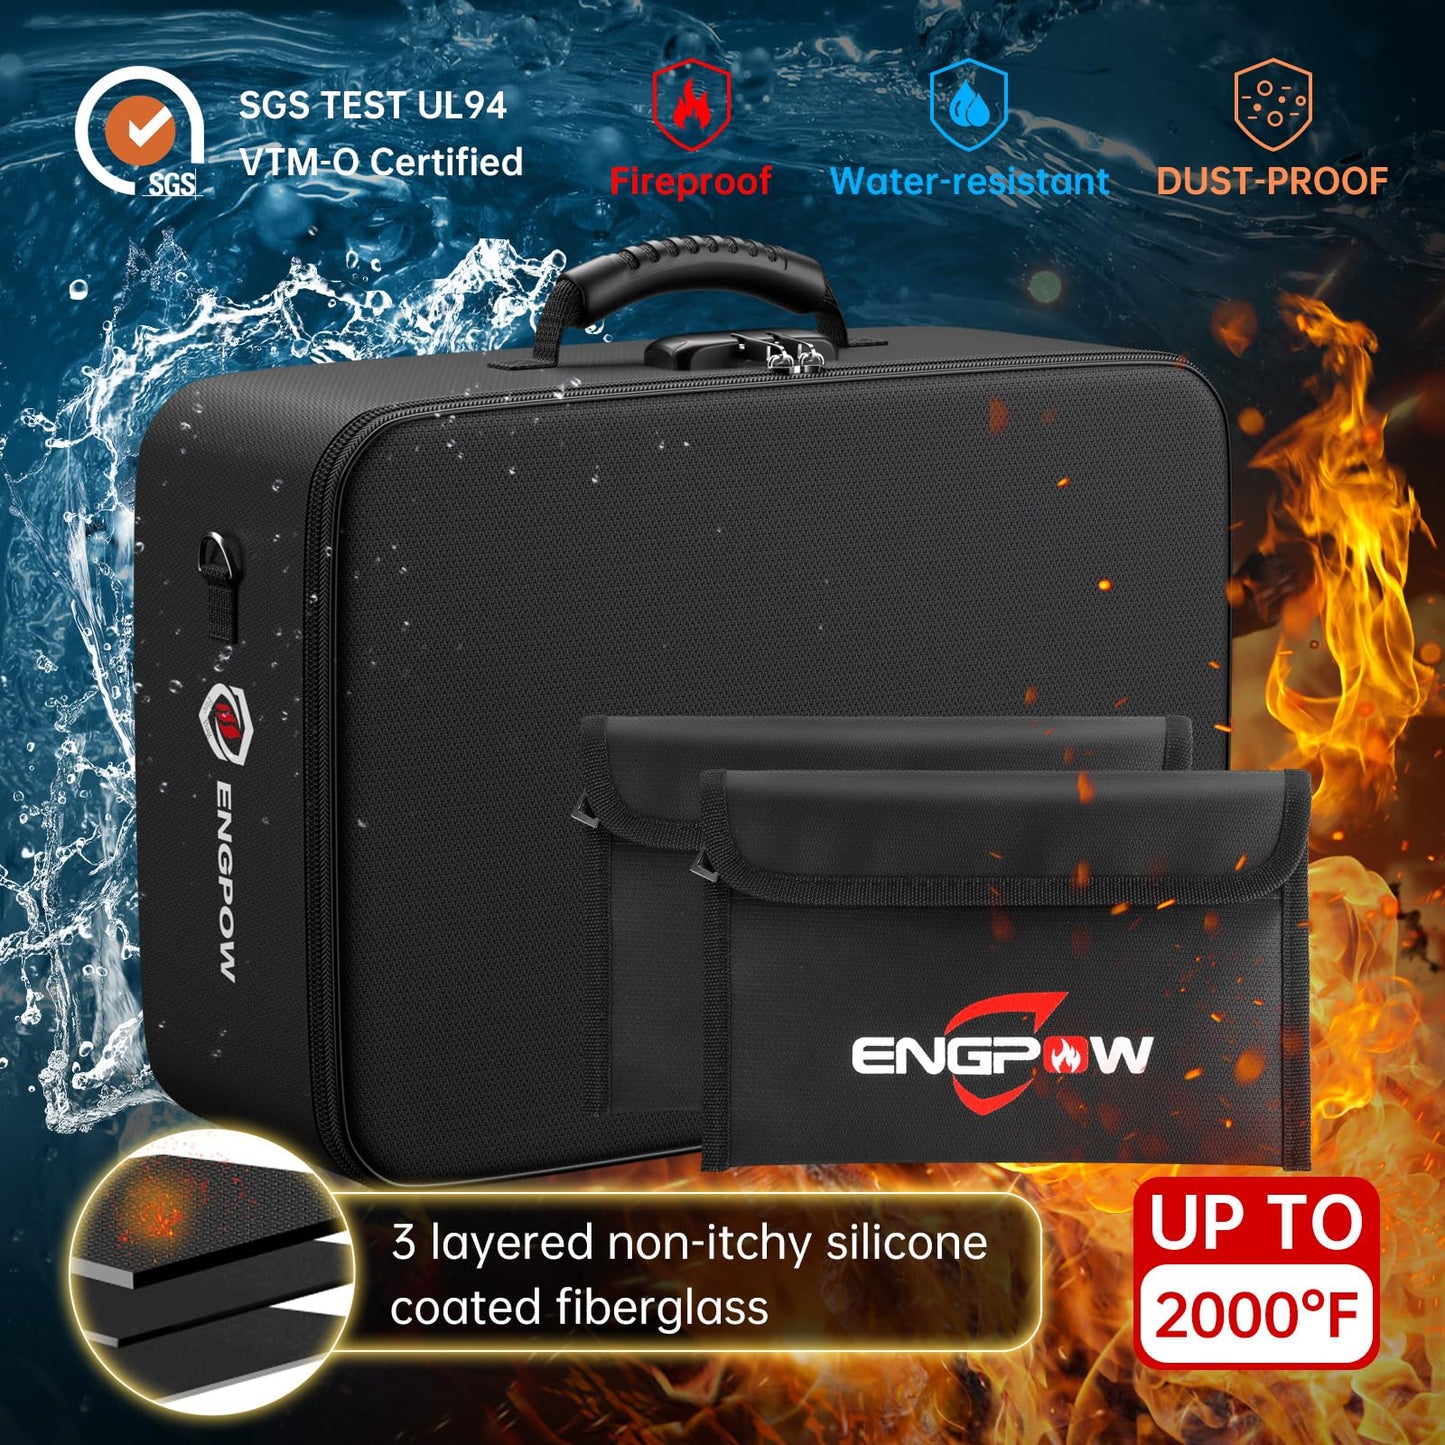 ENGPOW 600°F Fireproof Document Bag with Lock, Upgraded Insulated Fireproof and Waterproof Box 8-Layer Document Storage Bag, Portable Home Travel Safe Storage of Important Documents, Documents, Laptops